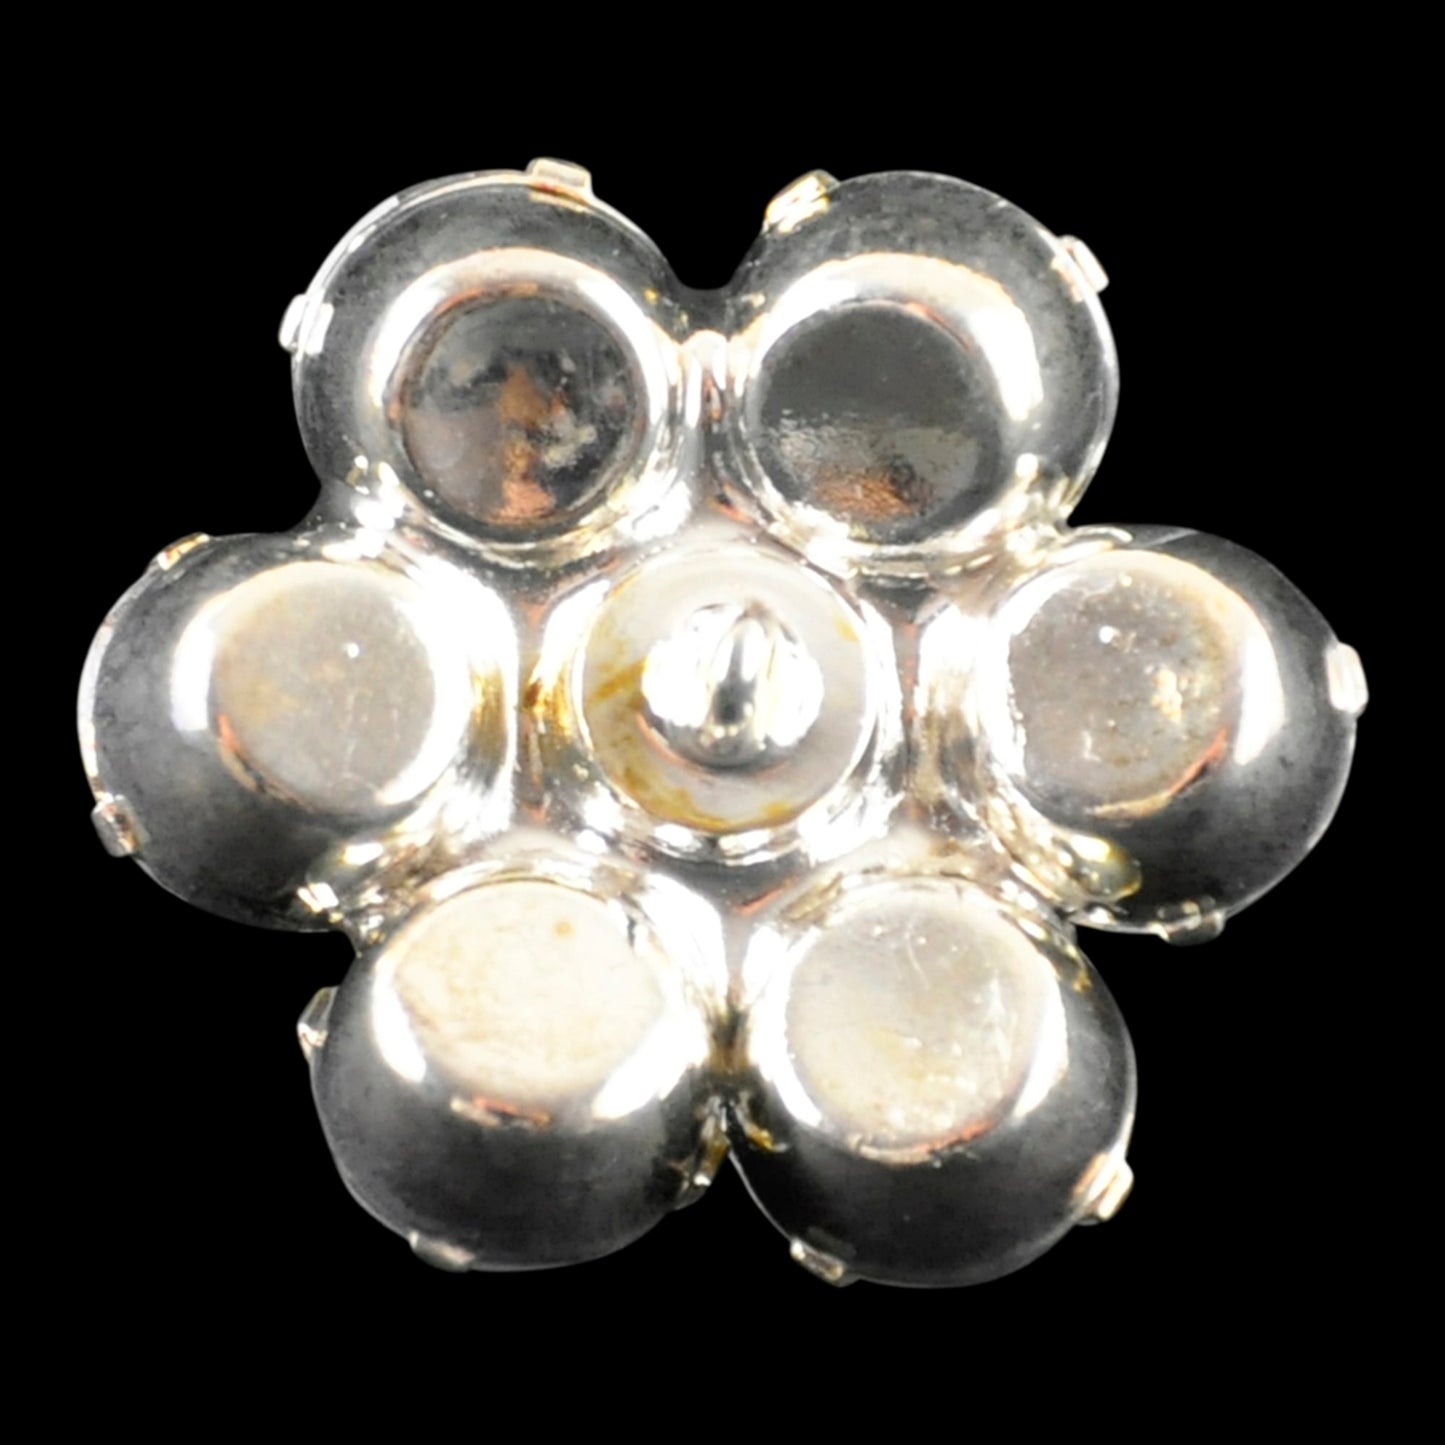 Rhinestone Buttons (6 PCS) - 1" wide - BRB-118